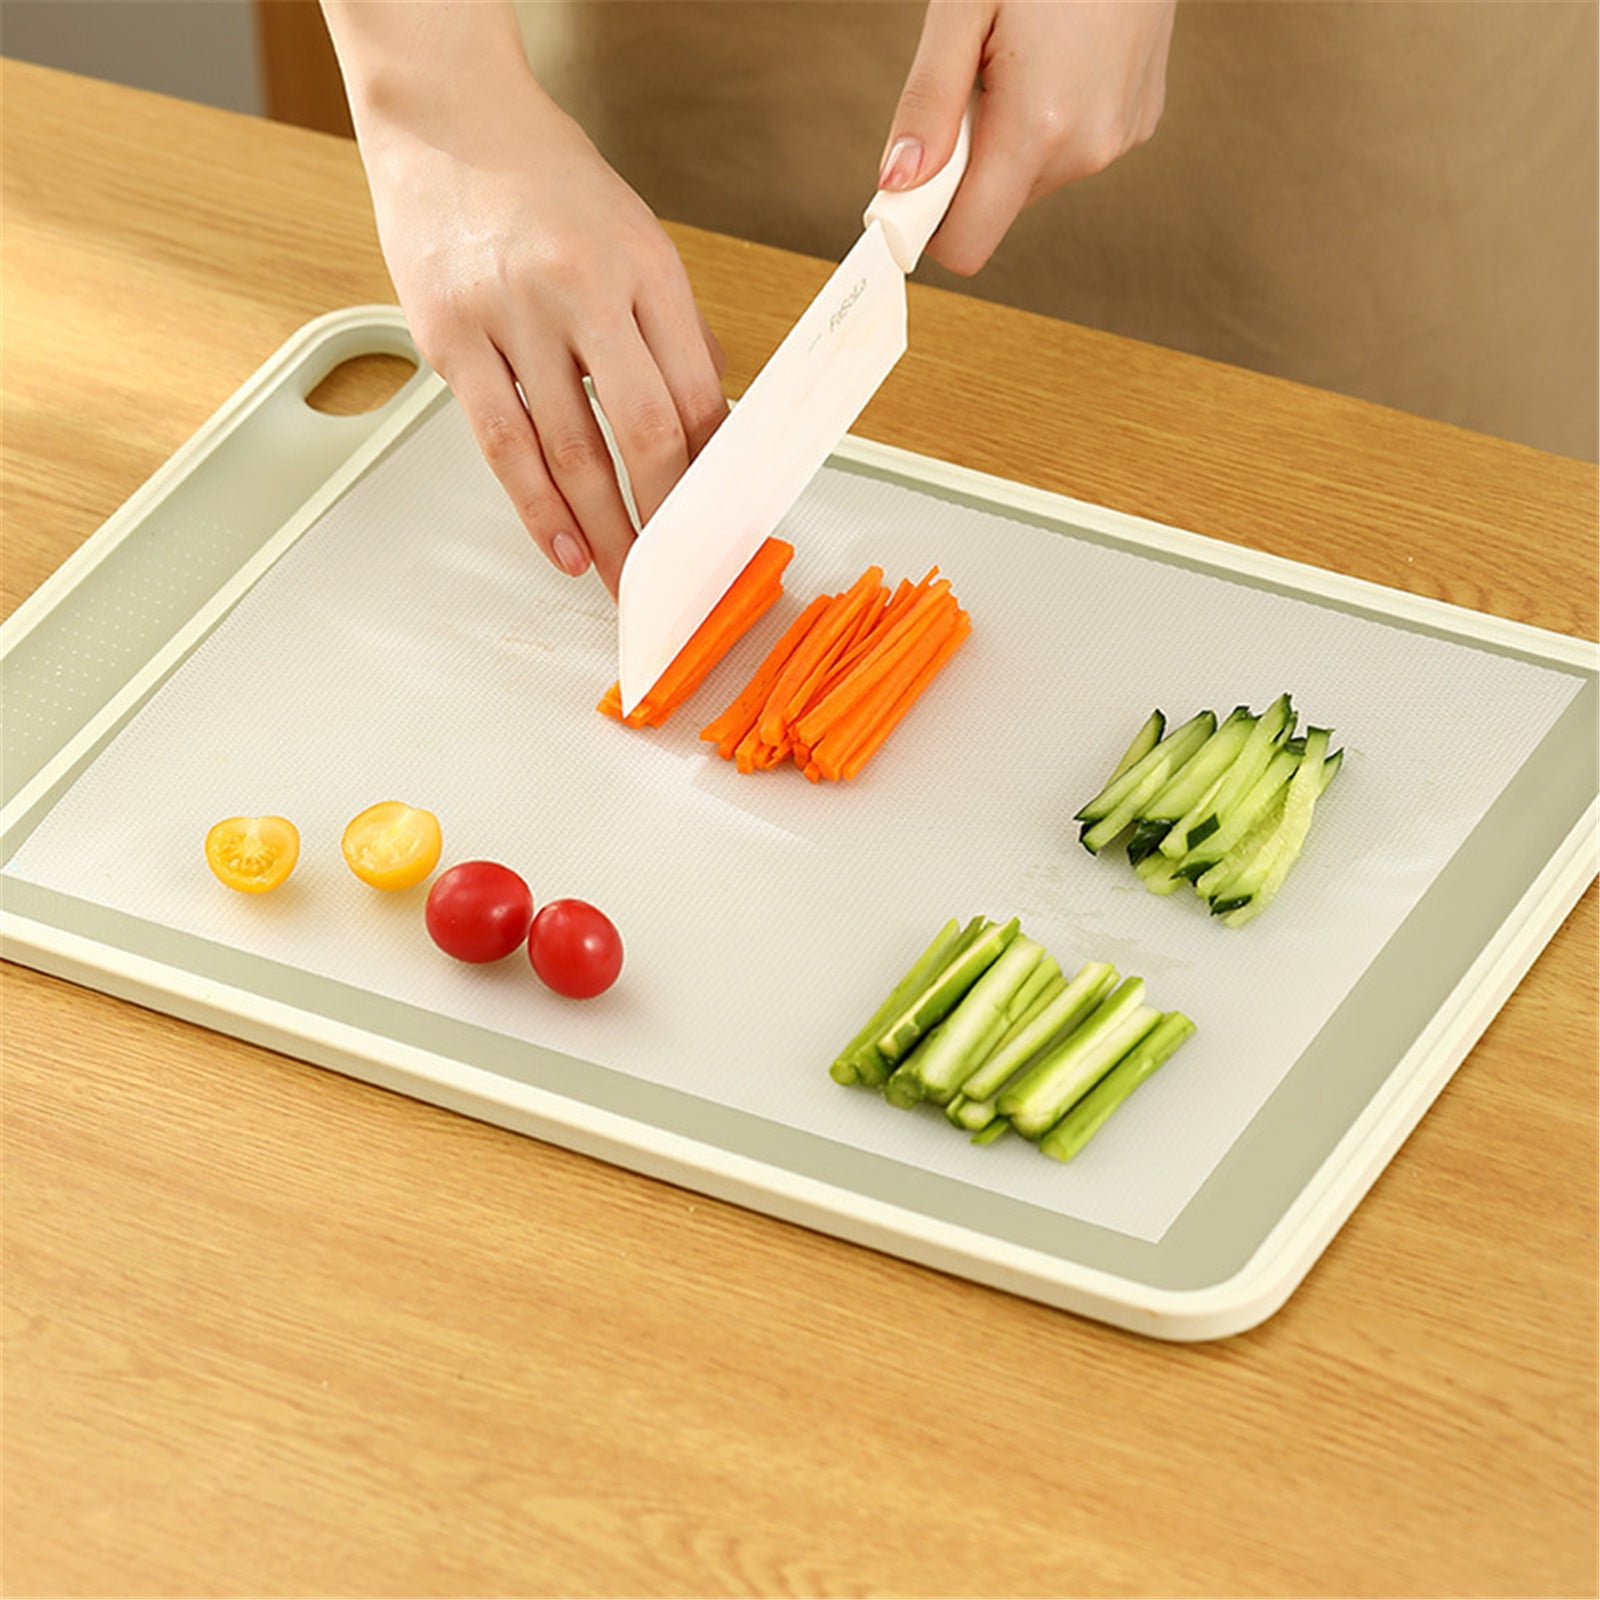 Disposable Cutting Board Convenient Sliding Cutter Plastic Disposable  Chopping Board Sheets - China Disposable Chopping Board and Disposable  Cutting Board price